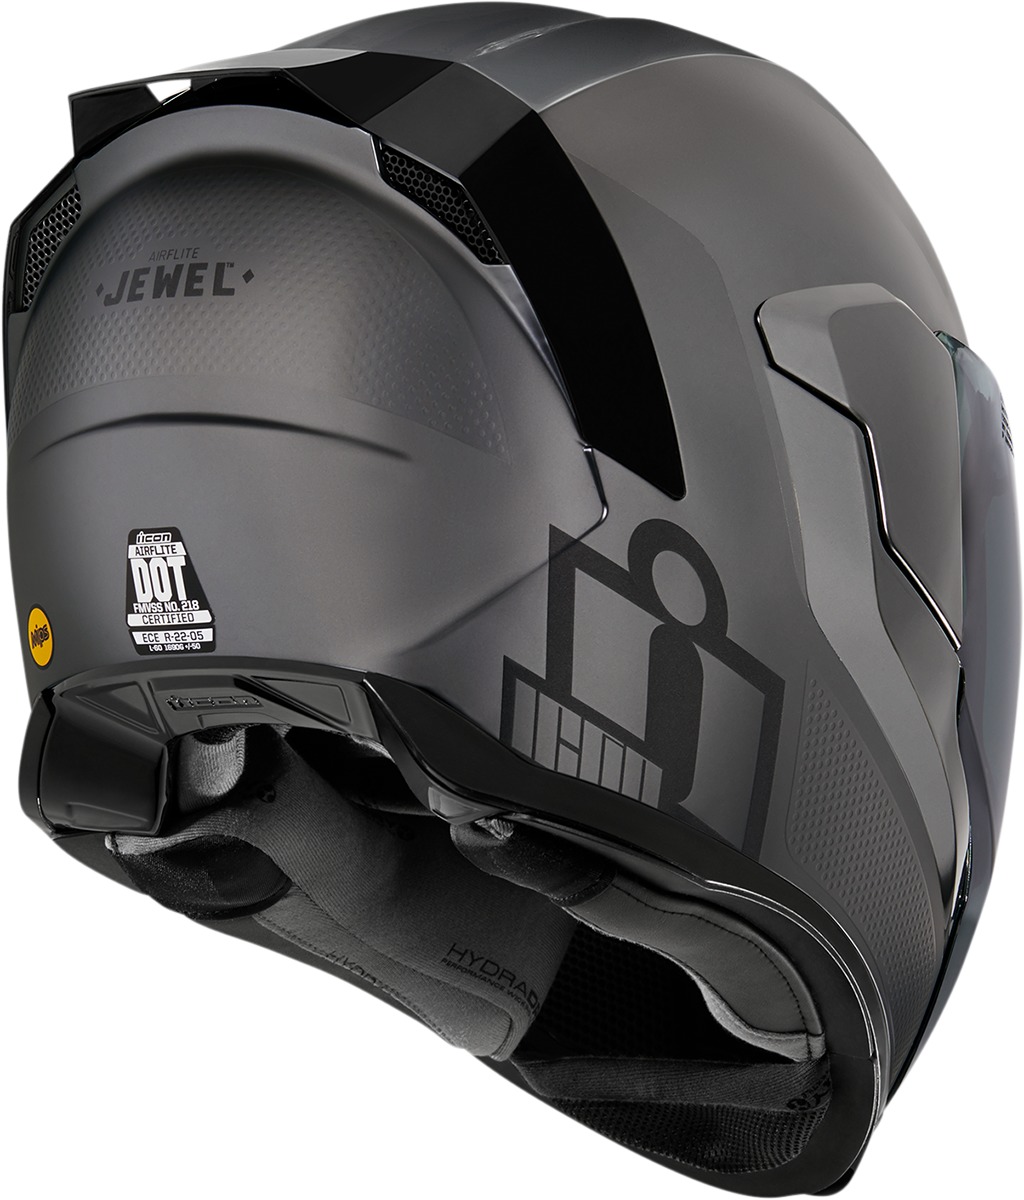 Silver Airflite Jewel MIPS Motorcycle Helmet - Small - Meets ECE 22.05 and DOT FMVSS-218 Standards - Click Image to Close